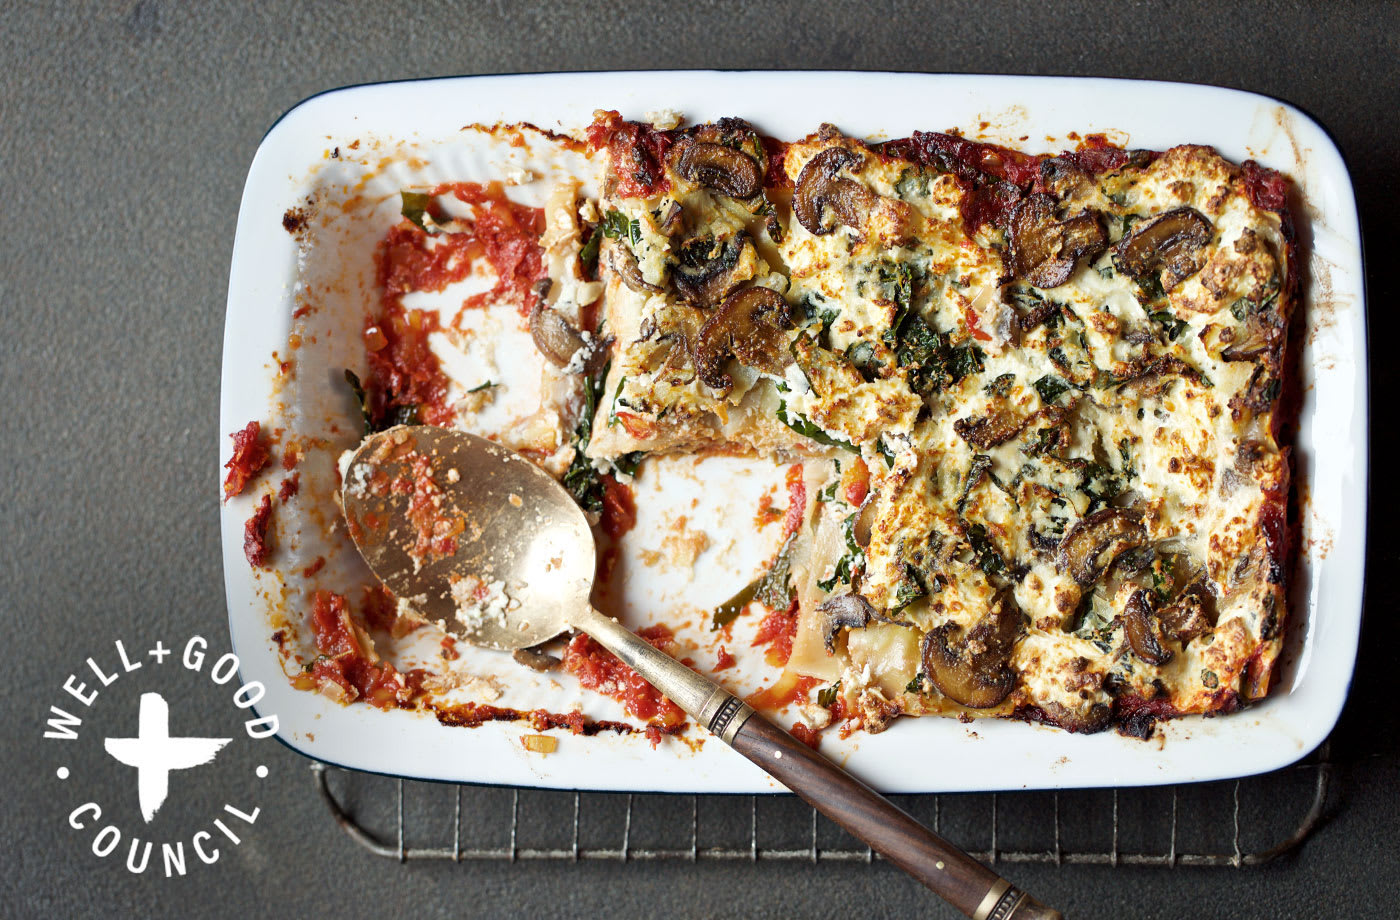 This Easy, Healthy Kale Mushroom Lasagna Will Make Your Next Pasta Night Even Better